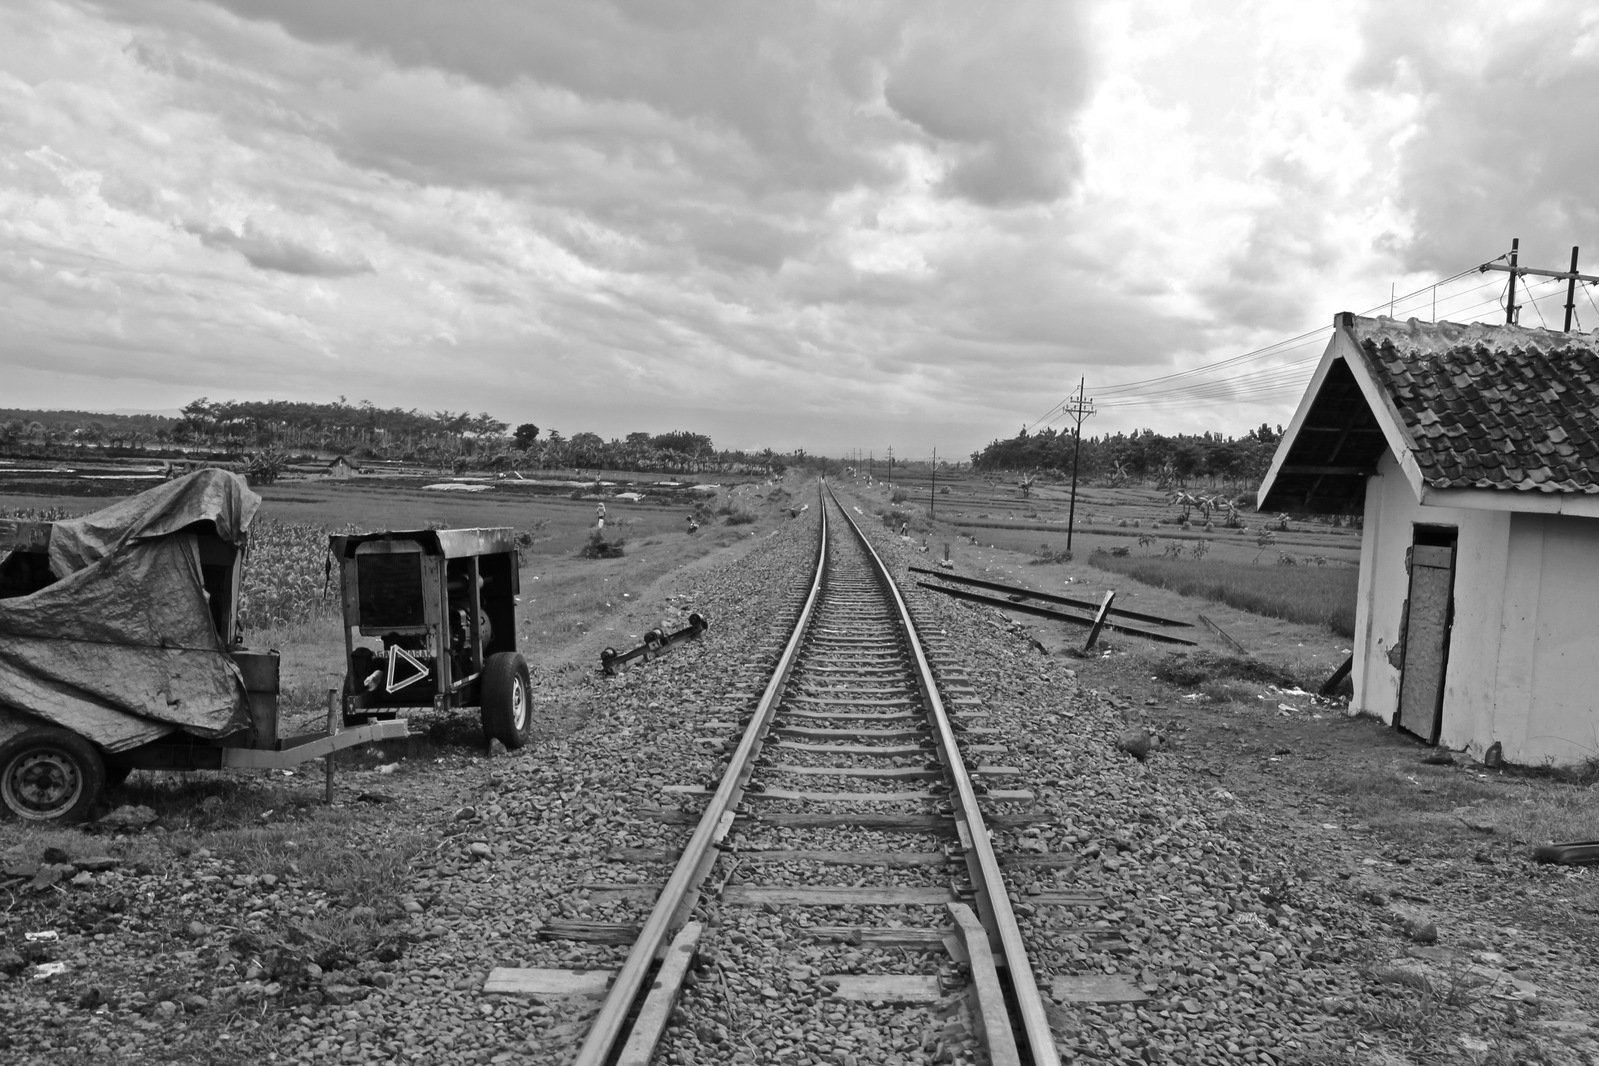 the view of an abandoned railroad station from the tracks